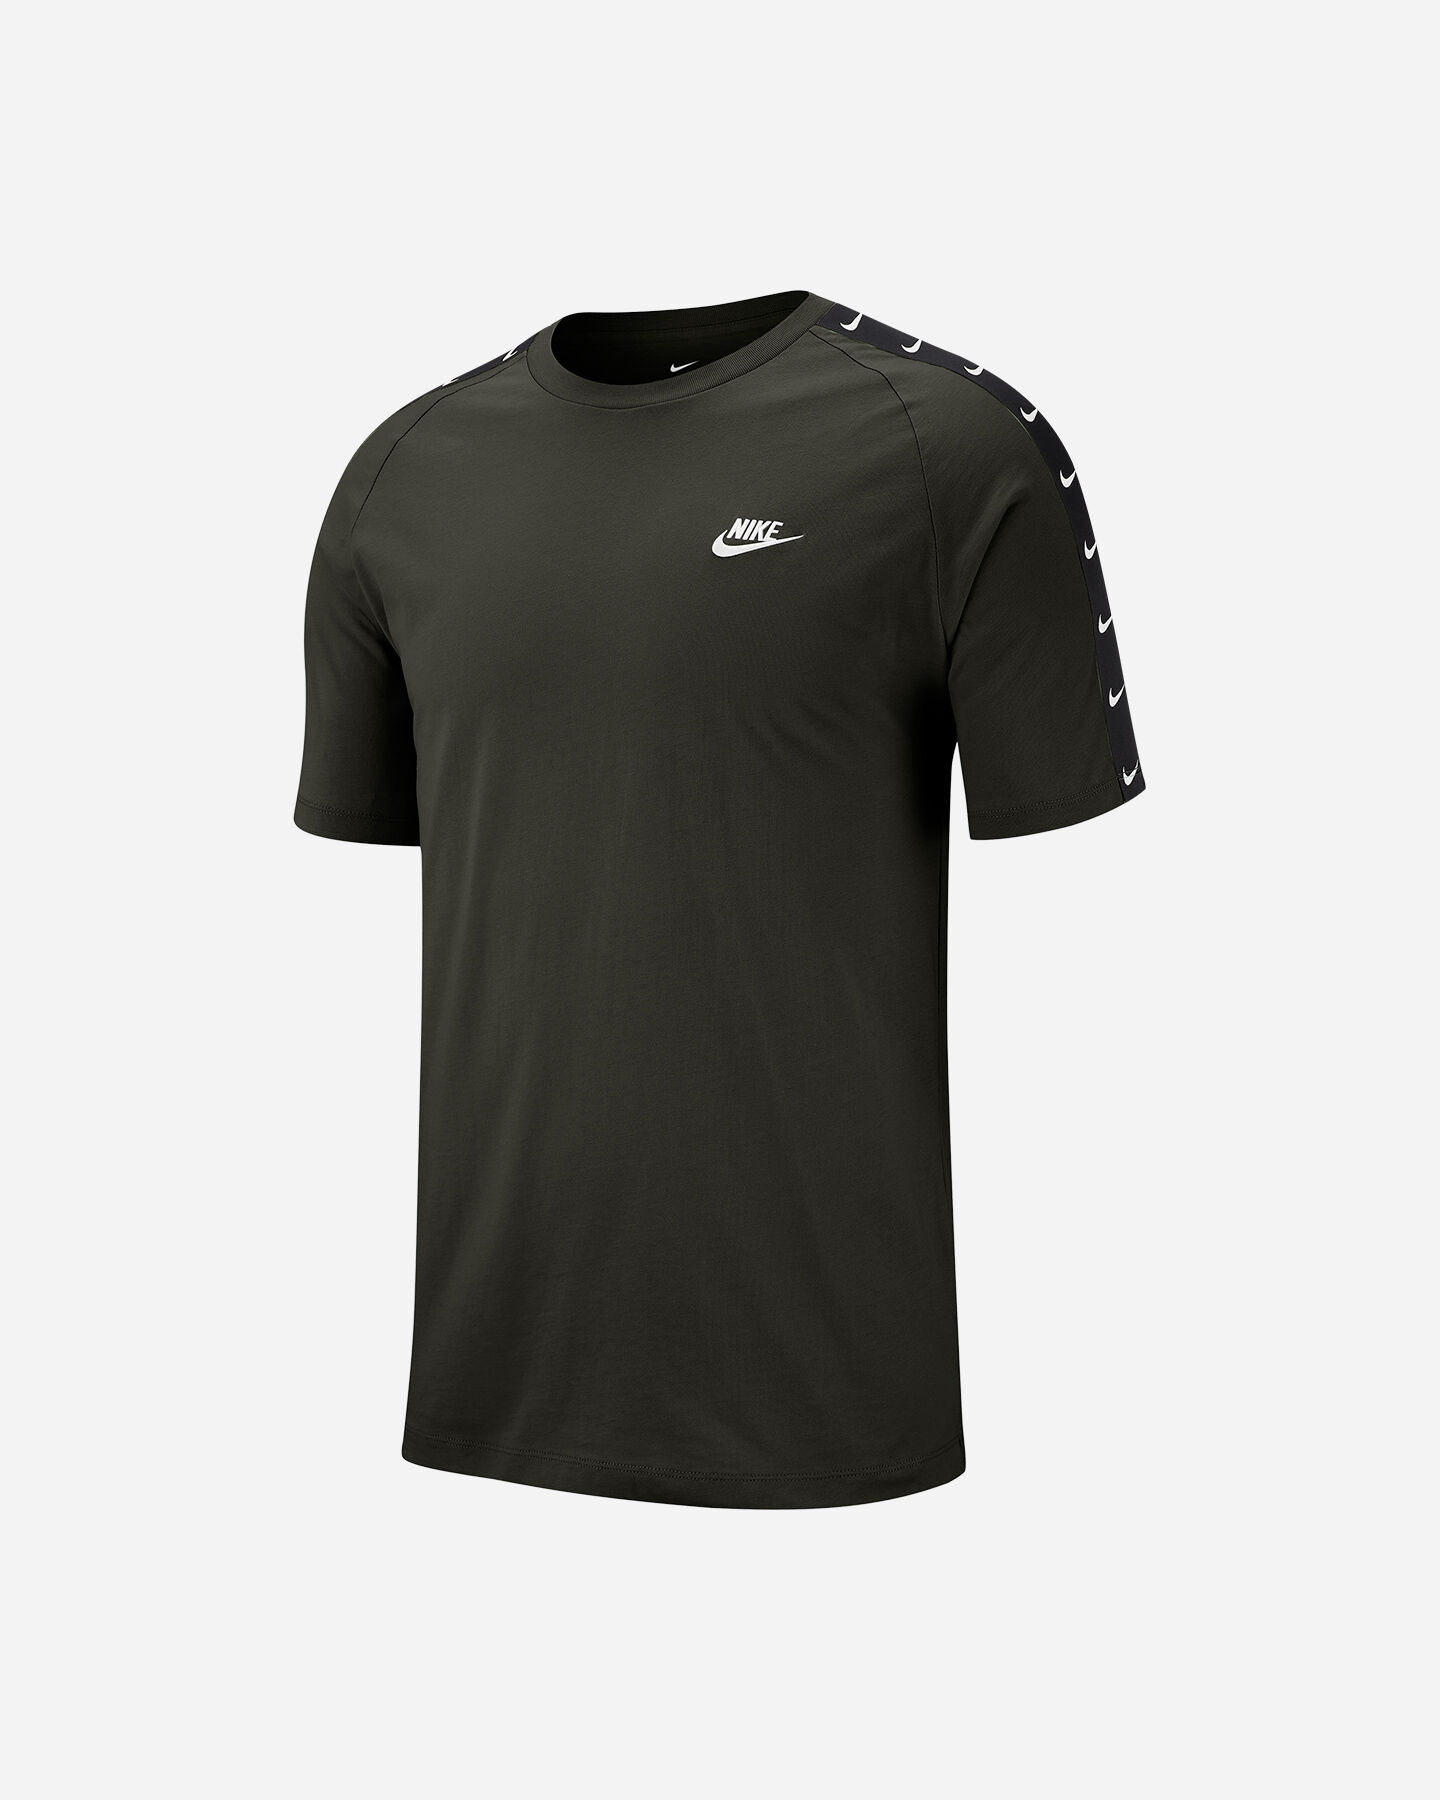  T-Shirt NIKE SWOOSH BAND M S5132896|355|XS scatto 0